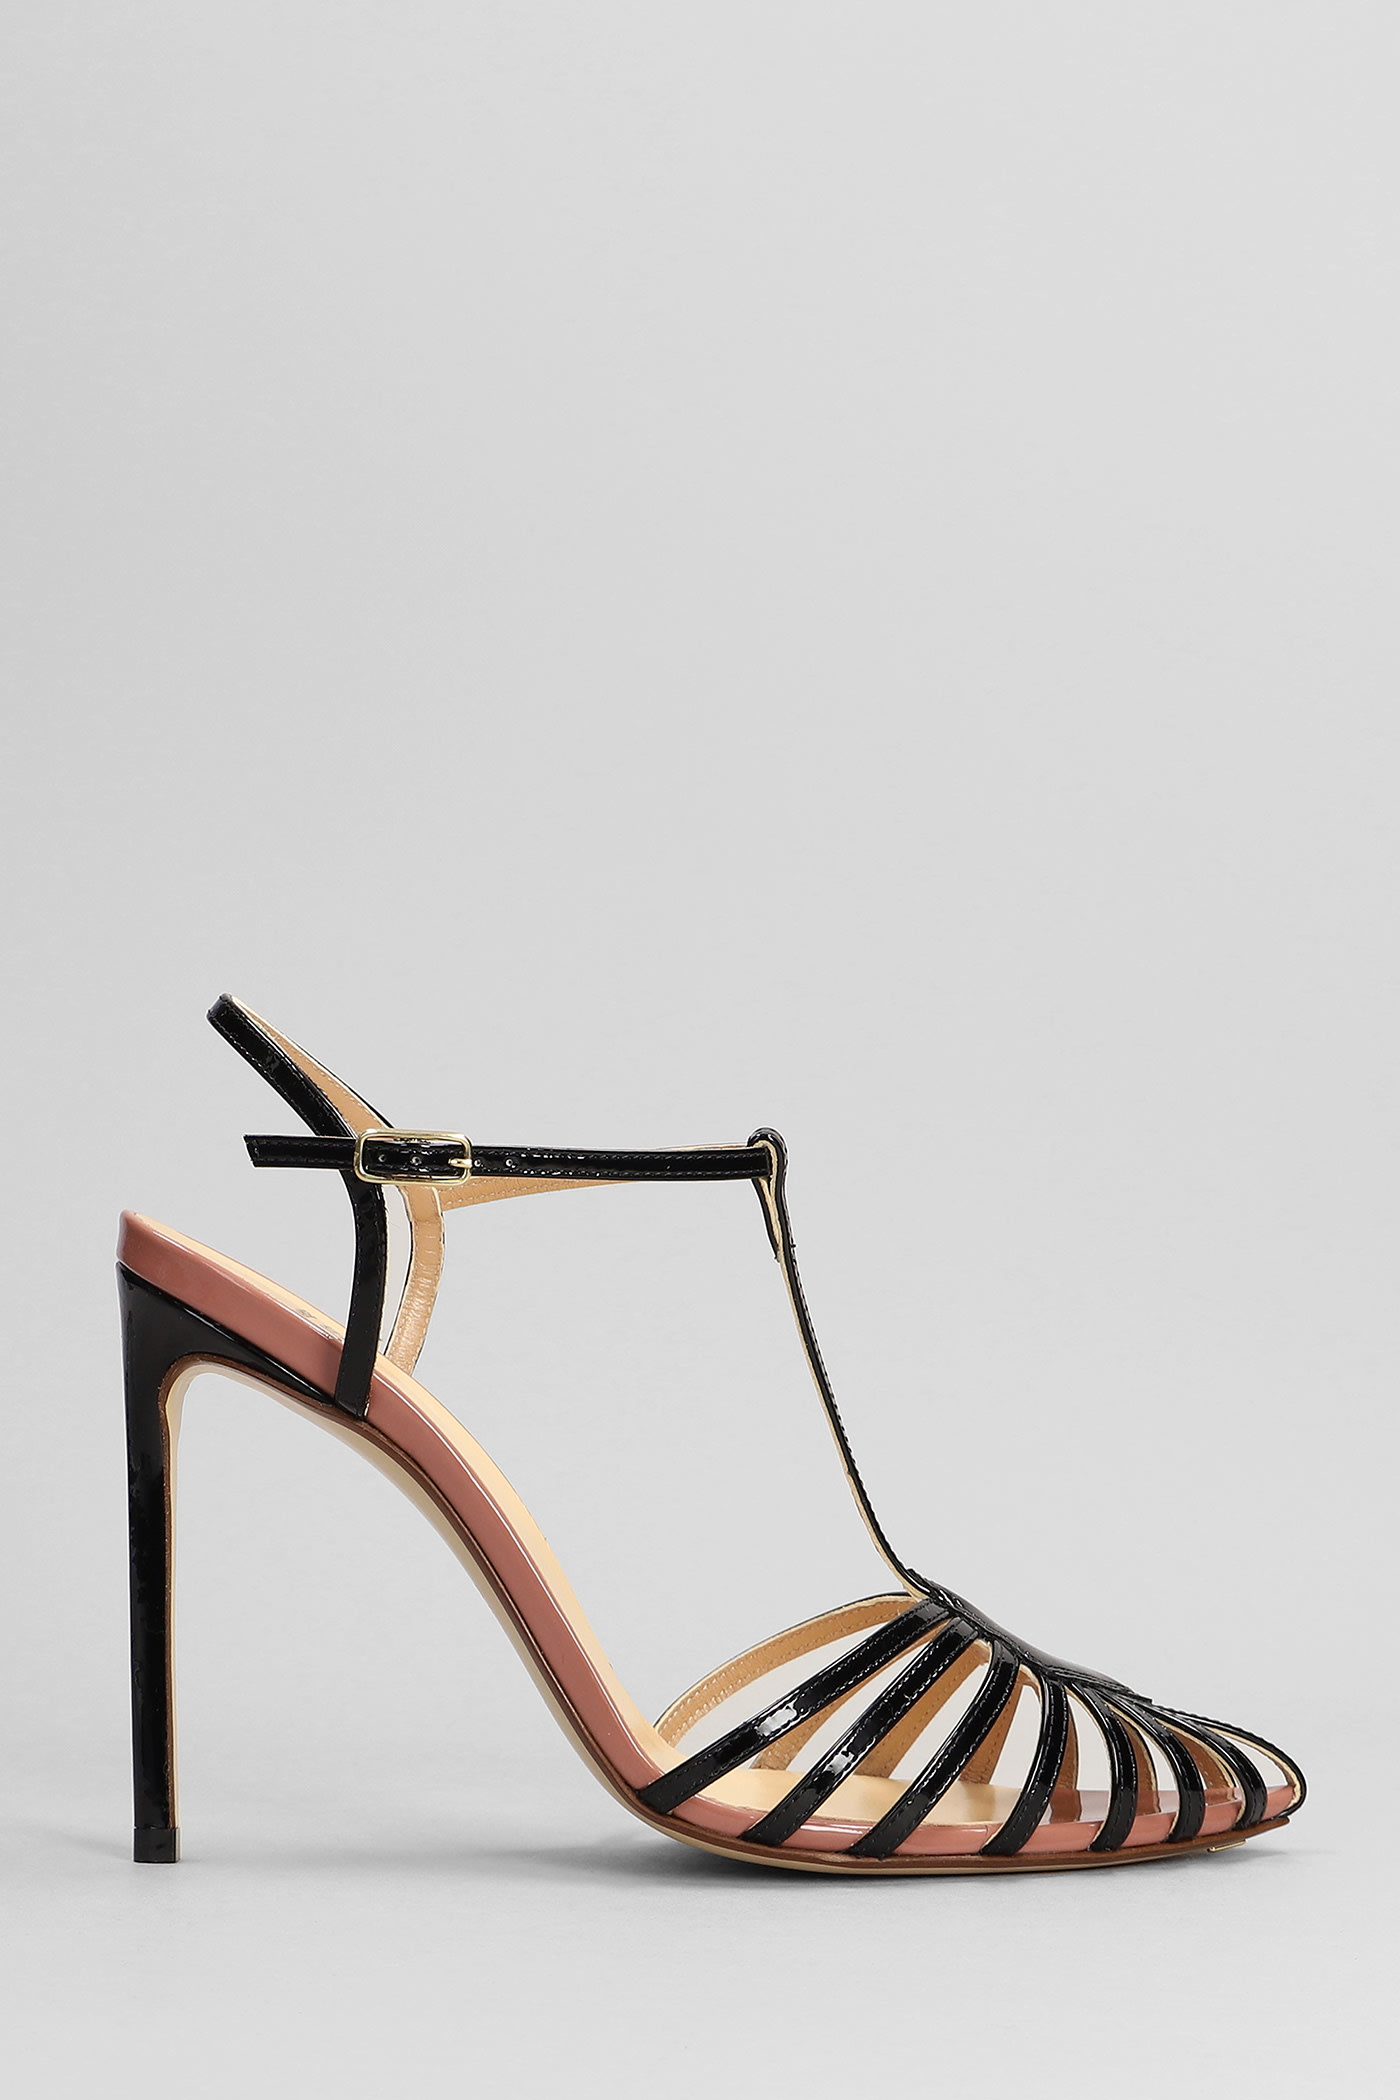 FRANCESCO RUSSO SANDALS IN BLACK PATENT LEATHER